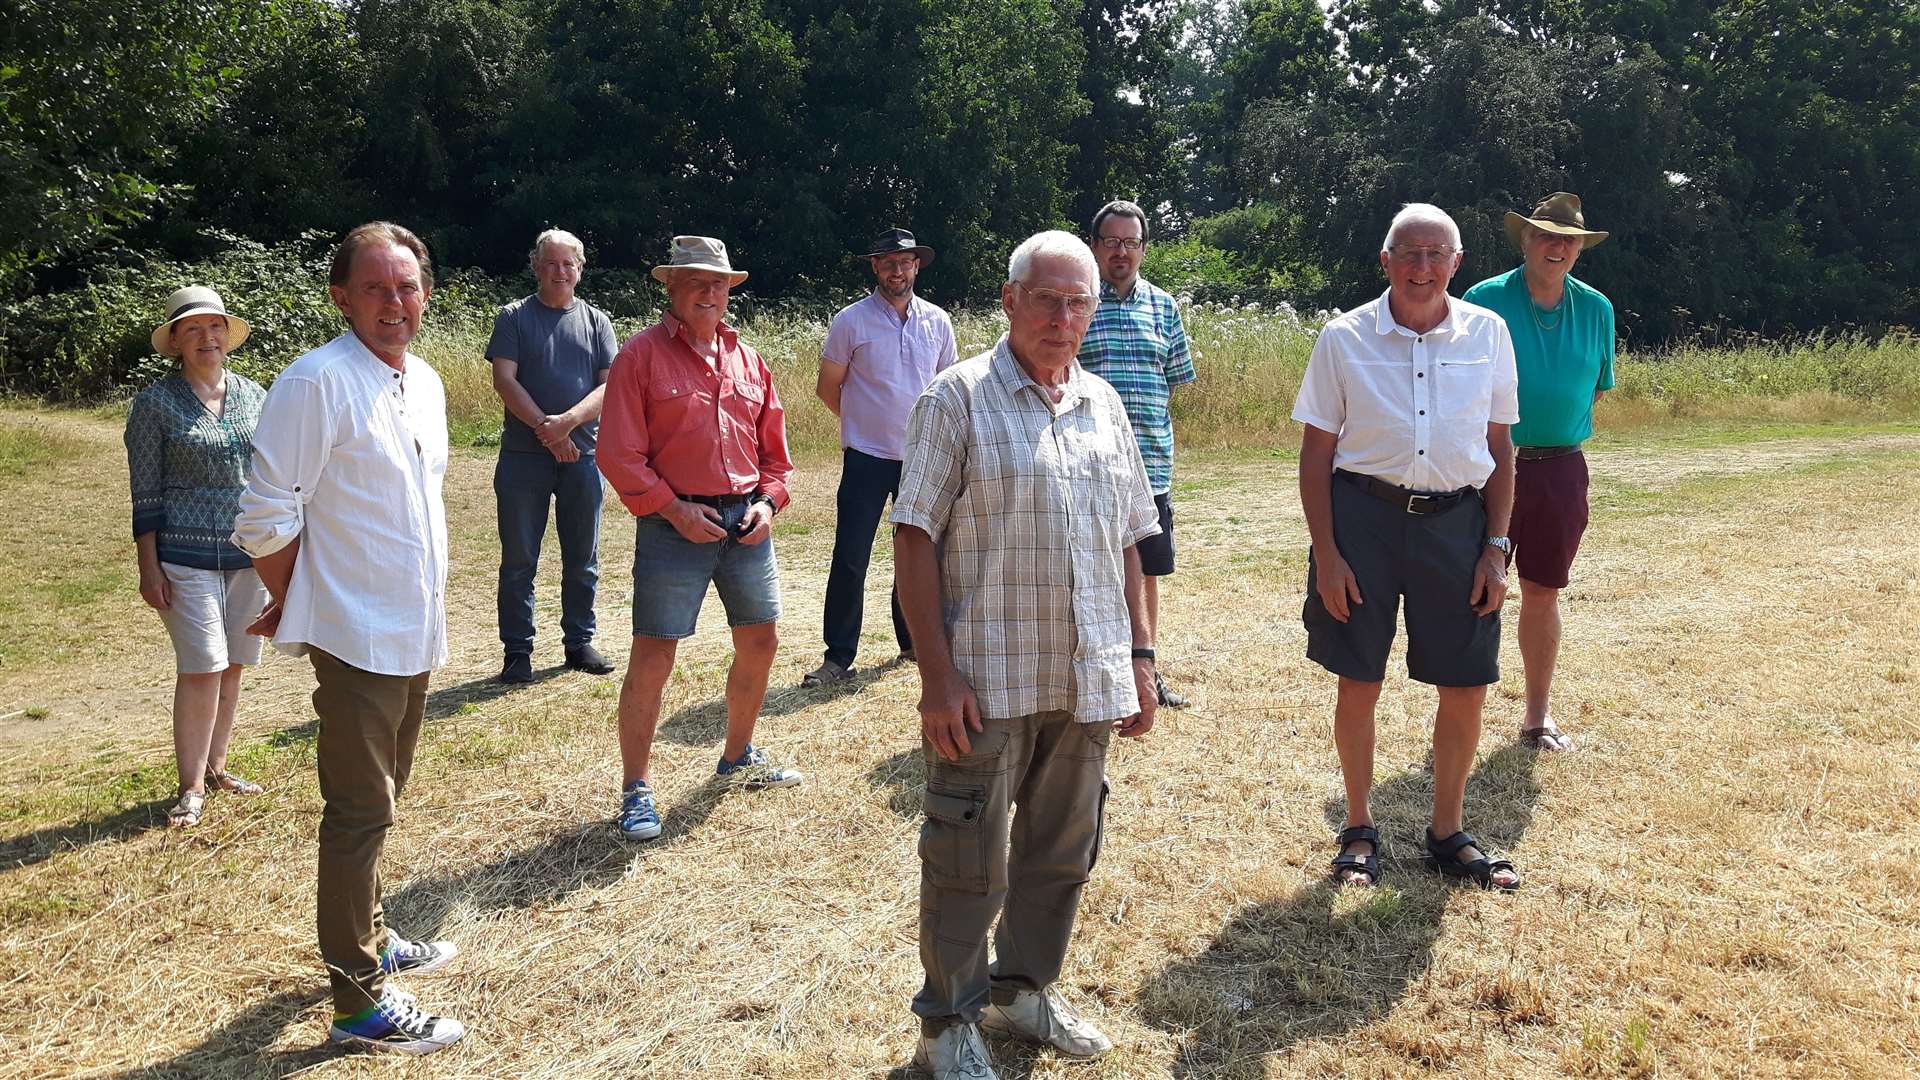 The Hayle Park Nature Reserve Trust 2020 annual general meeting. The socially distanced trustees: from left: Jane Holman, Derek Mortimer, Brian Clark, Bryn Cornwell, Paul Wilby, Dennis Usmar, Mark Jess, David Hill and Bryan Stovell